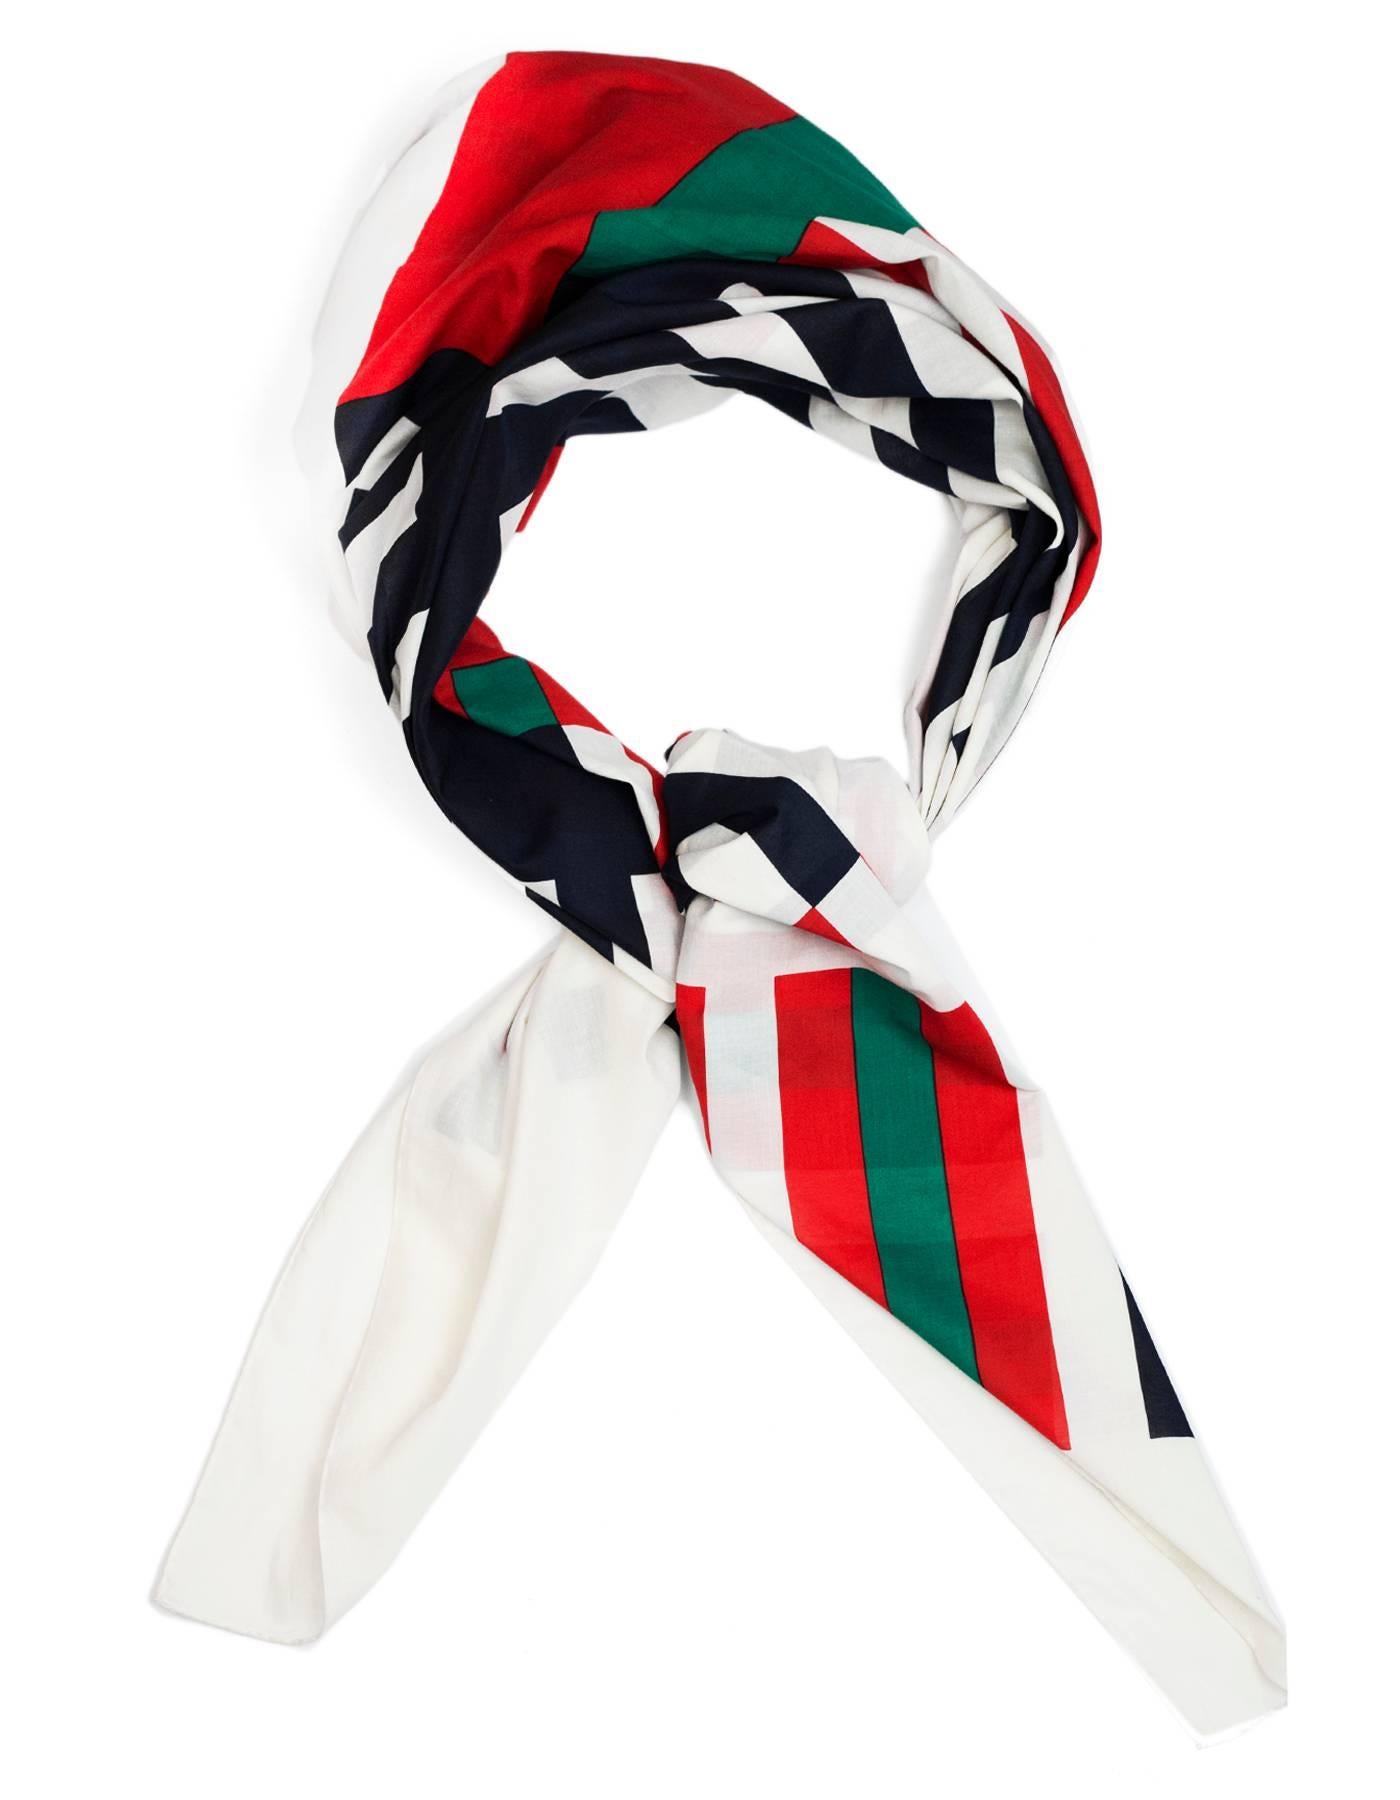 Chanel Red, White & Navy CC Scarf/Wrap

Made In: Italy
Color: Red, white, navy
Composition: Not listed, feels like cotton
Overall Condition: Excellent pre-owned condition with the exception of some light marks/stains

Measurements:
Length: